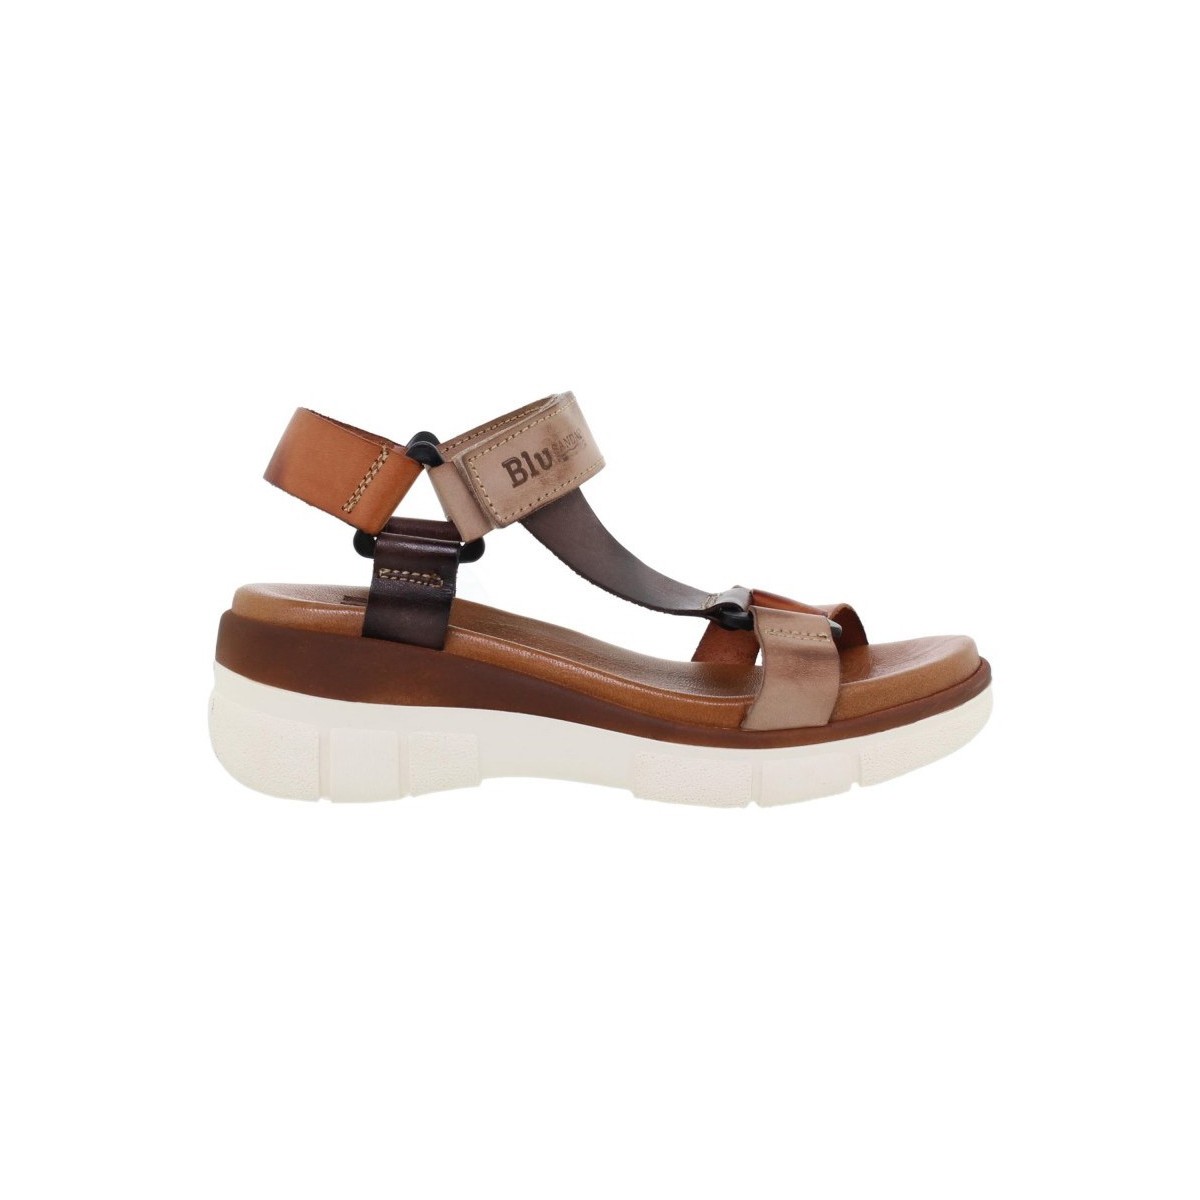 Sandalias de piel con cuña by Blusandal 
Manufactured and designed in Spain.
Made of cow leather.
Combined leather and textile l